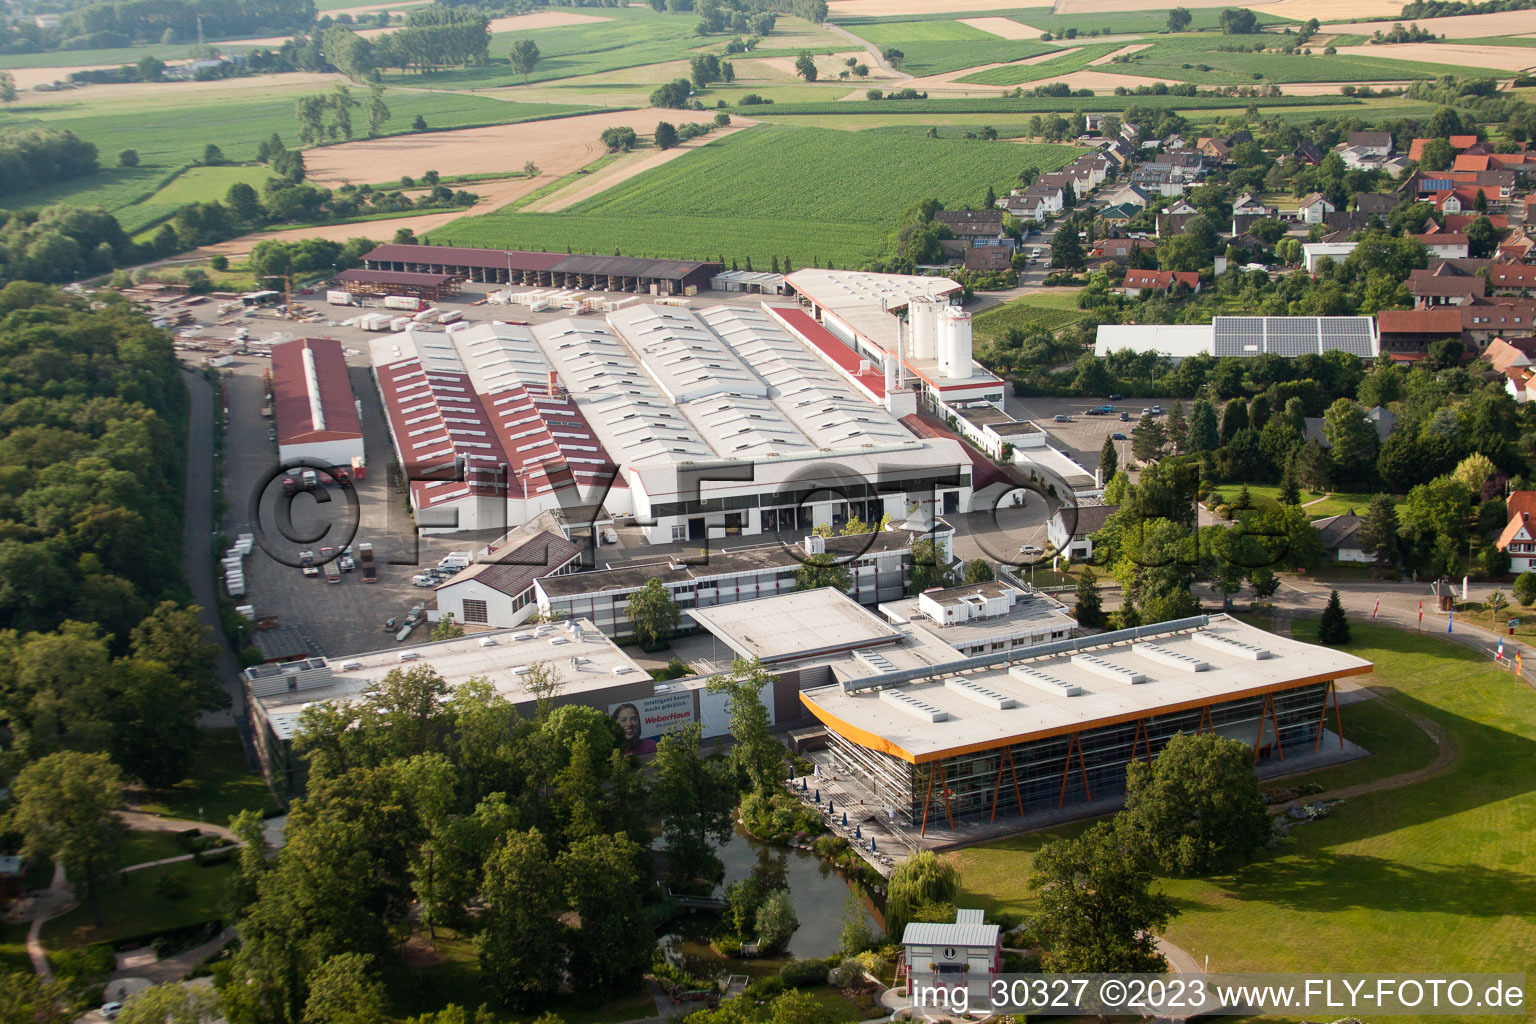 Weber-Haus in the district Linx in Rheinau in the state Baden-Wuerttemberg, Germany out of the air